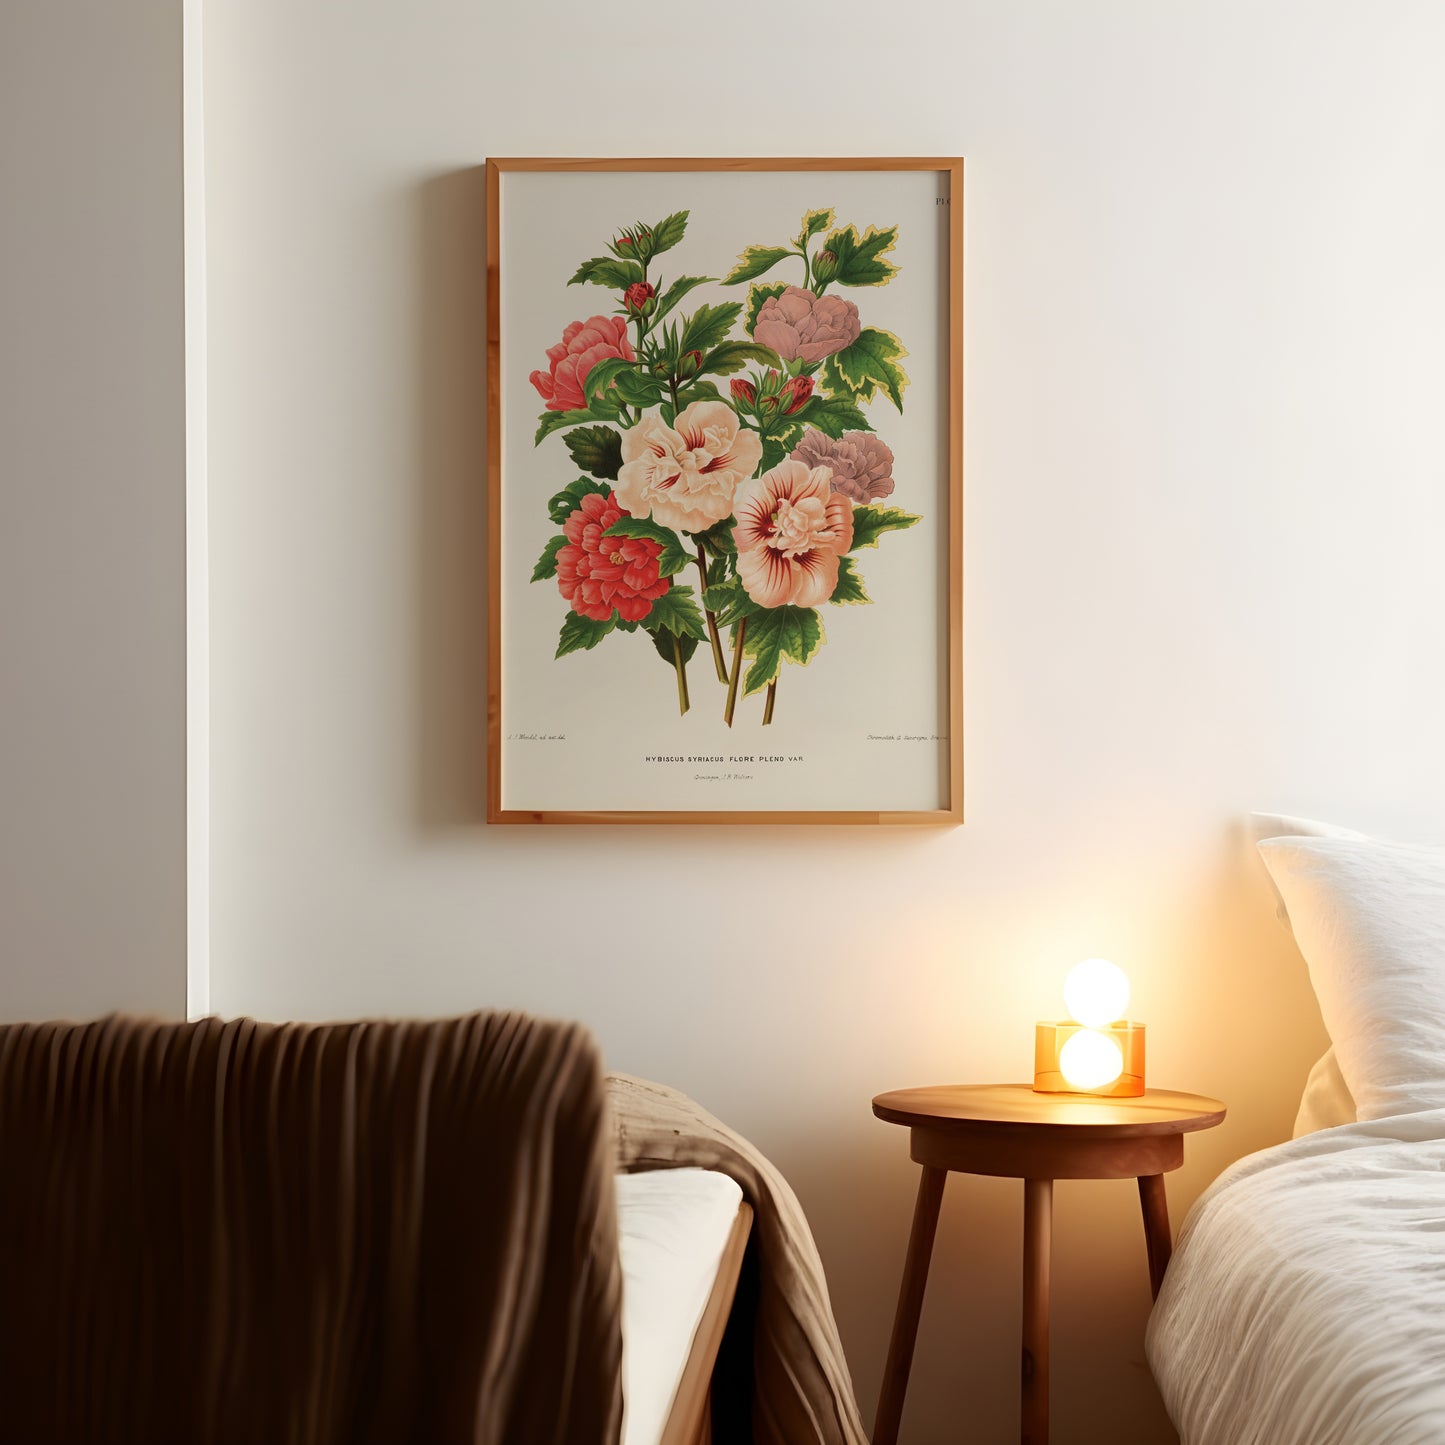 a picture of flowers on a wall above a bed